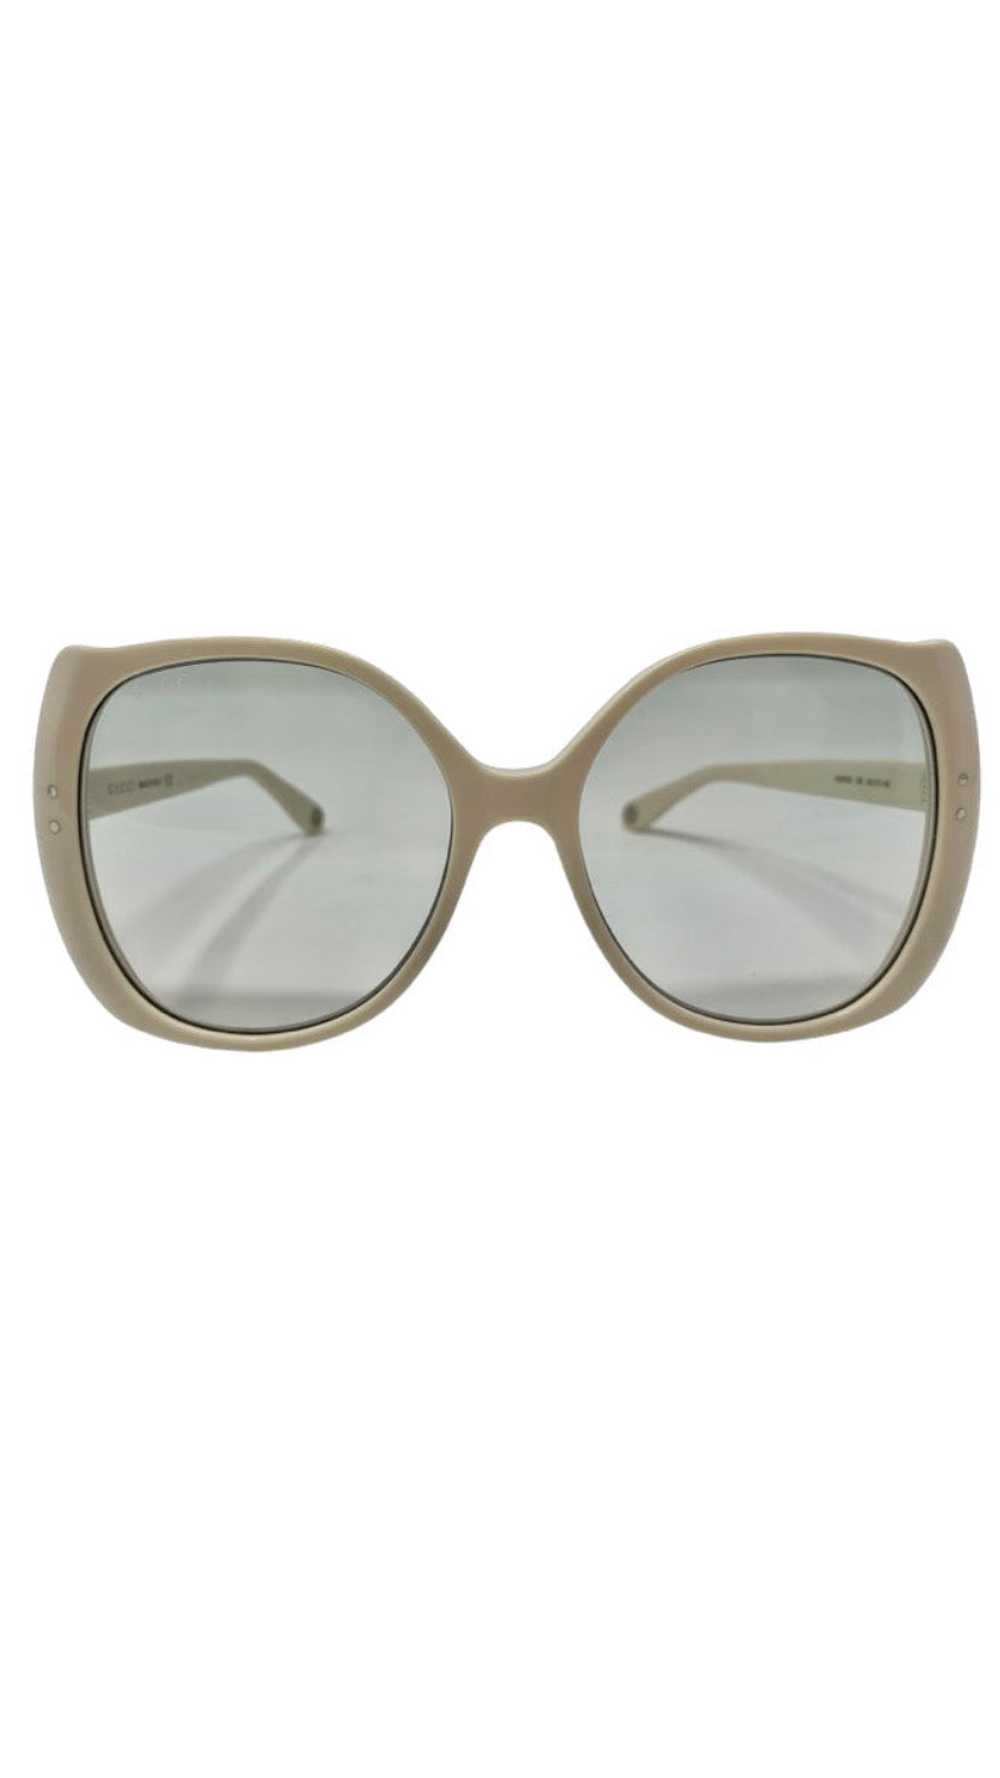 Gucci by Tom Ford Oversized Sunglasses - image 1